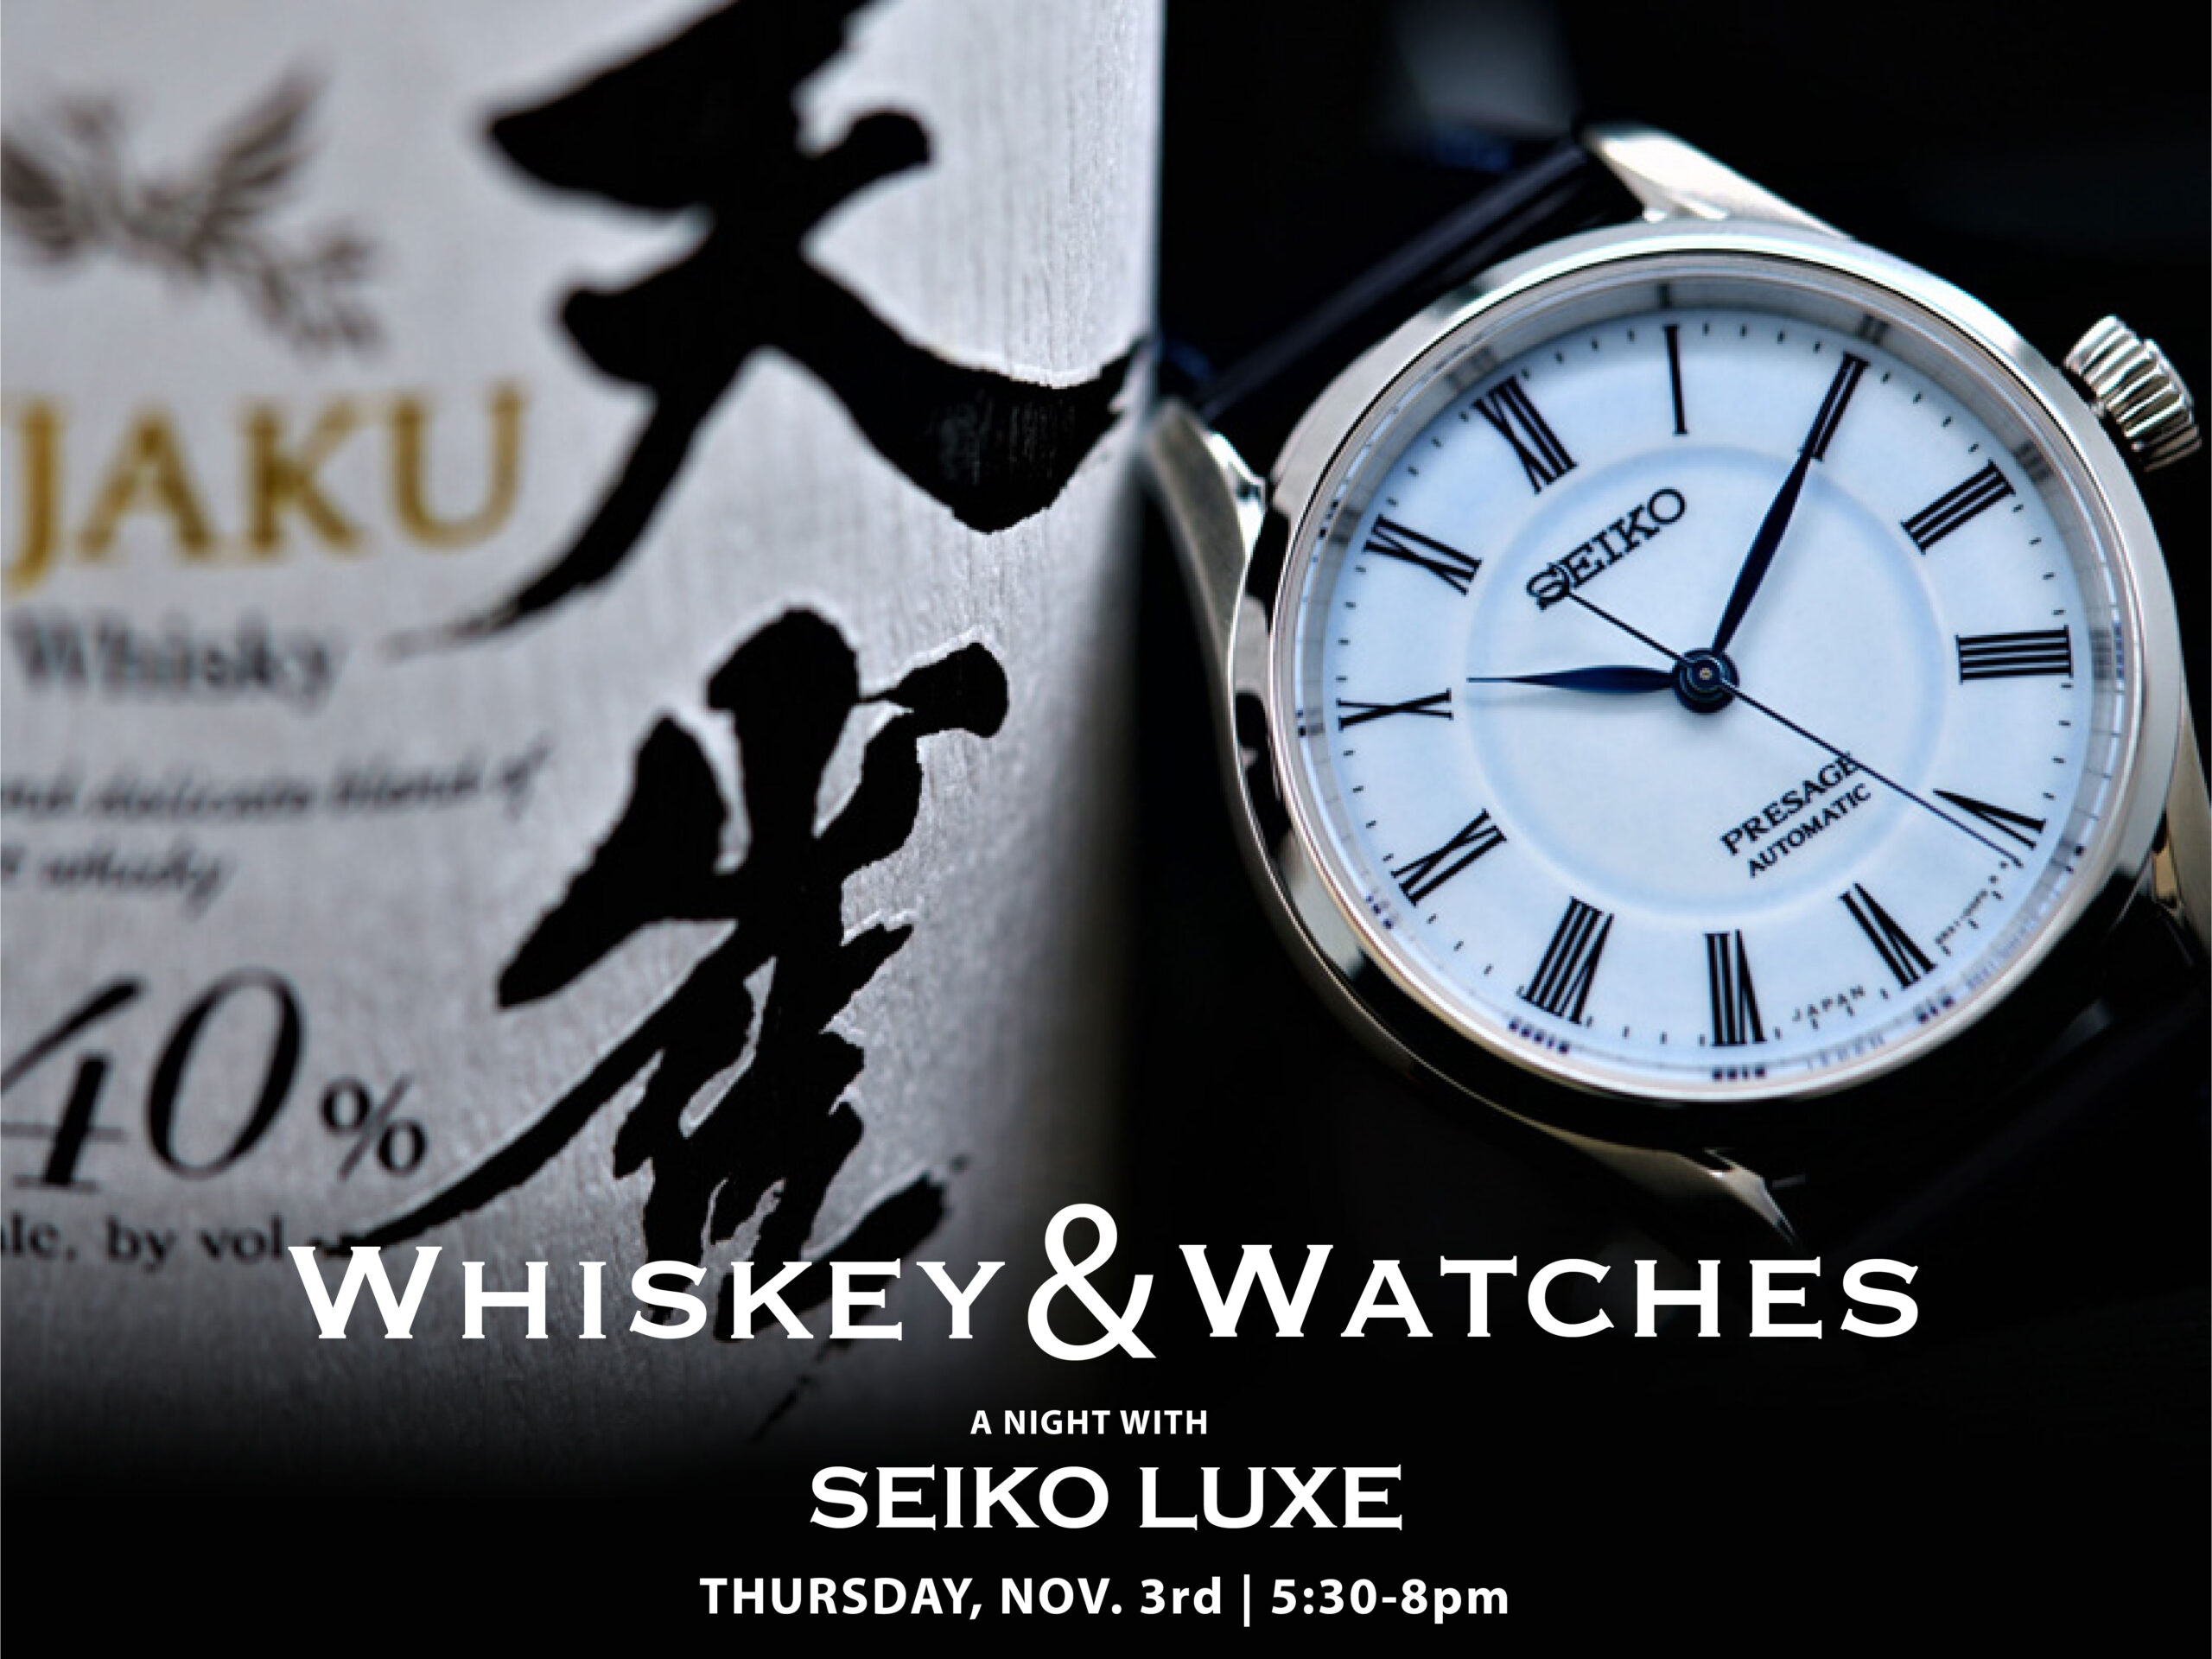 Orlando Watch Company | Whiskey & Watches with Seiko Luxe